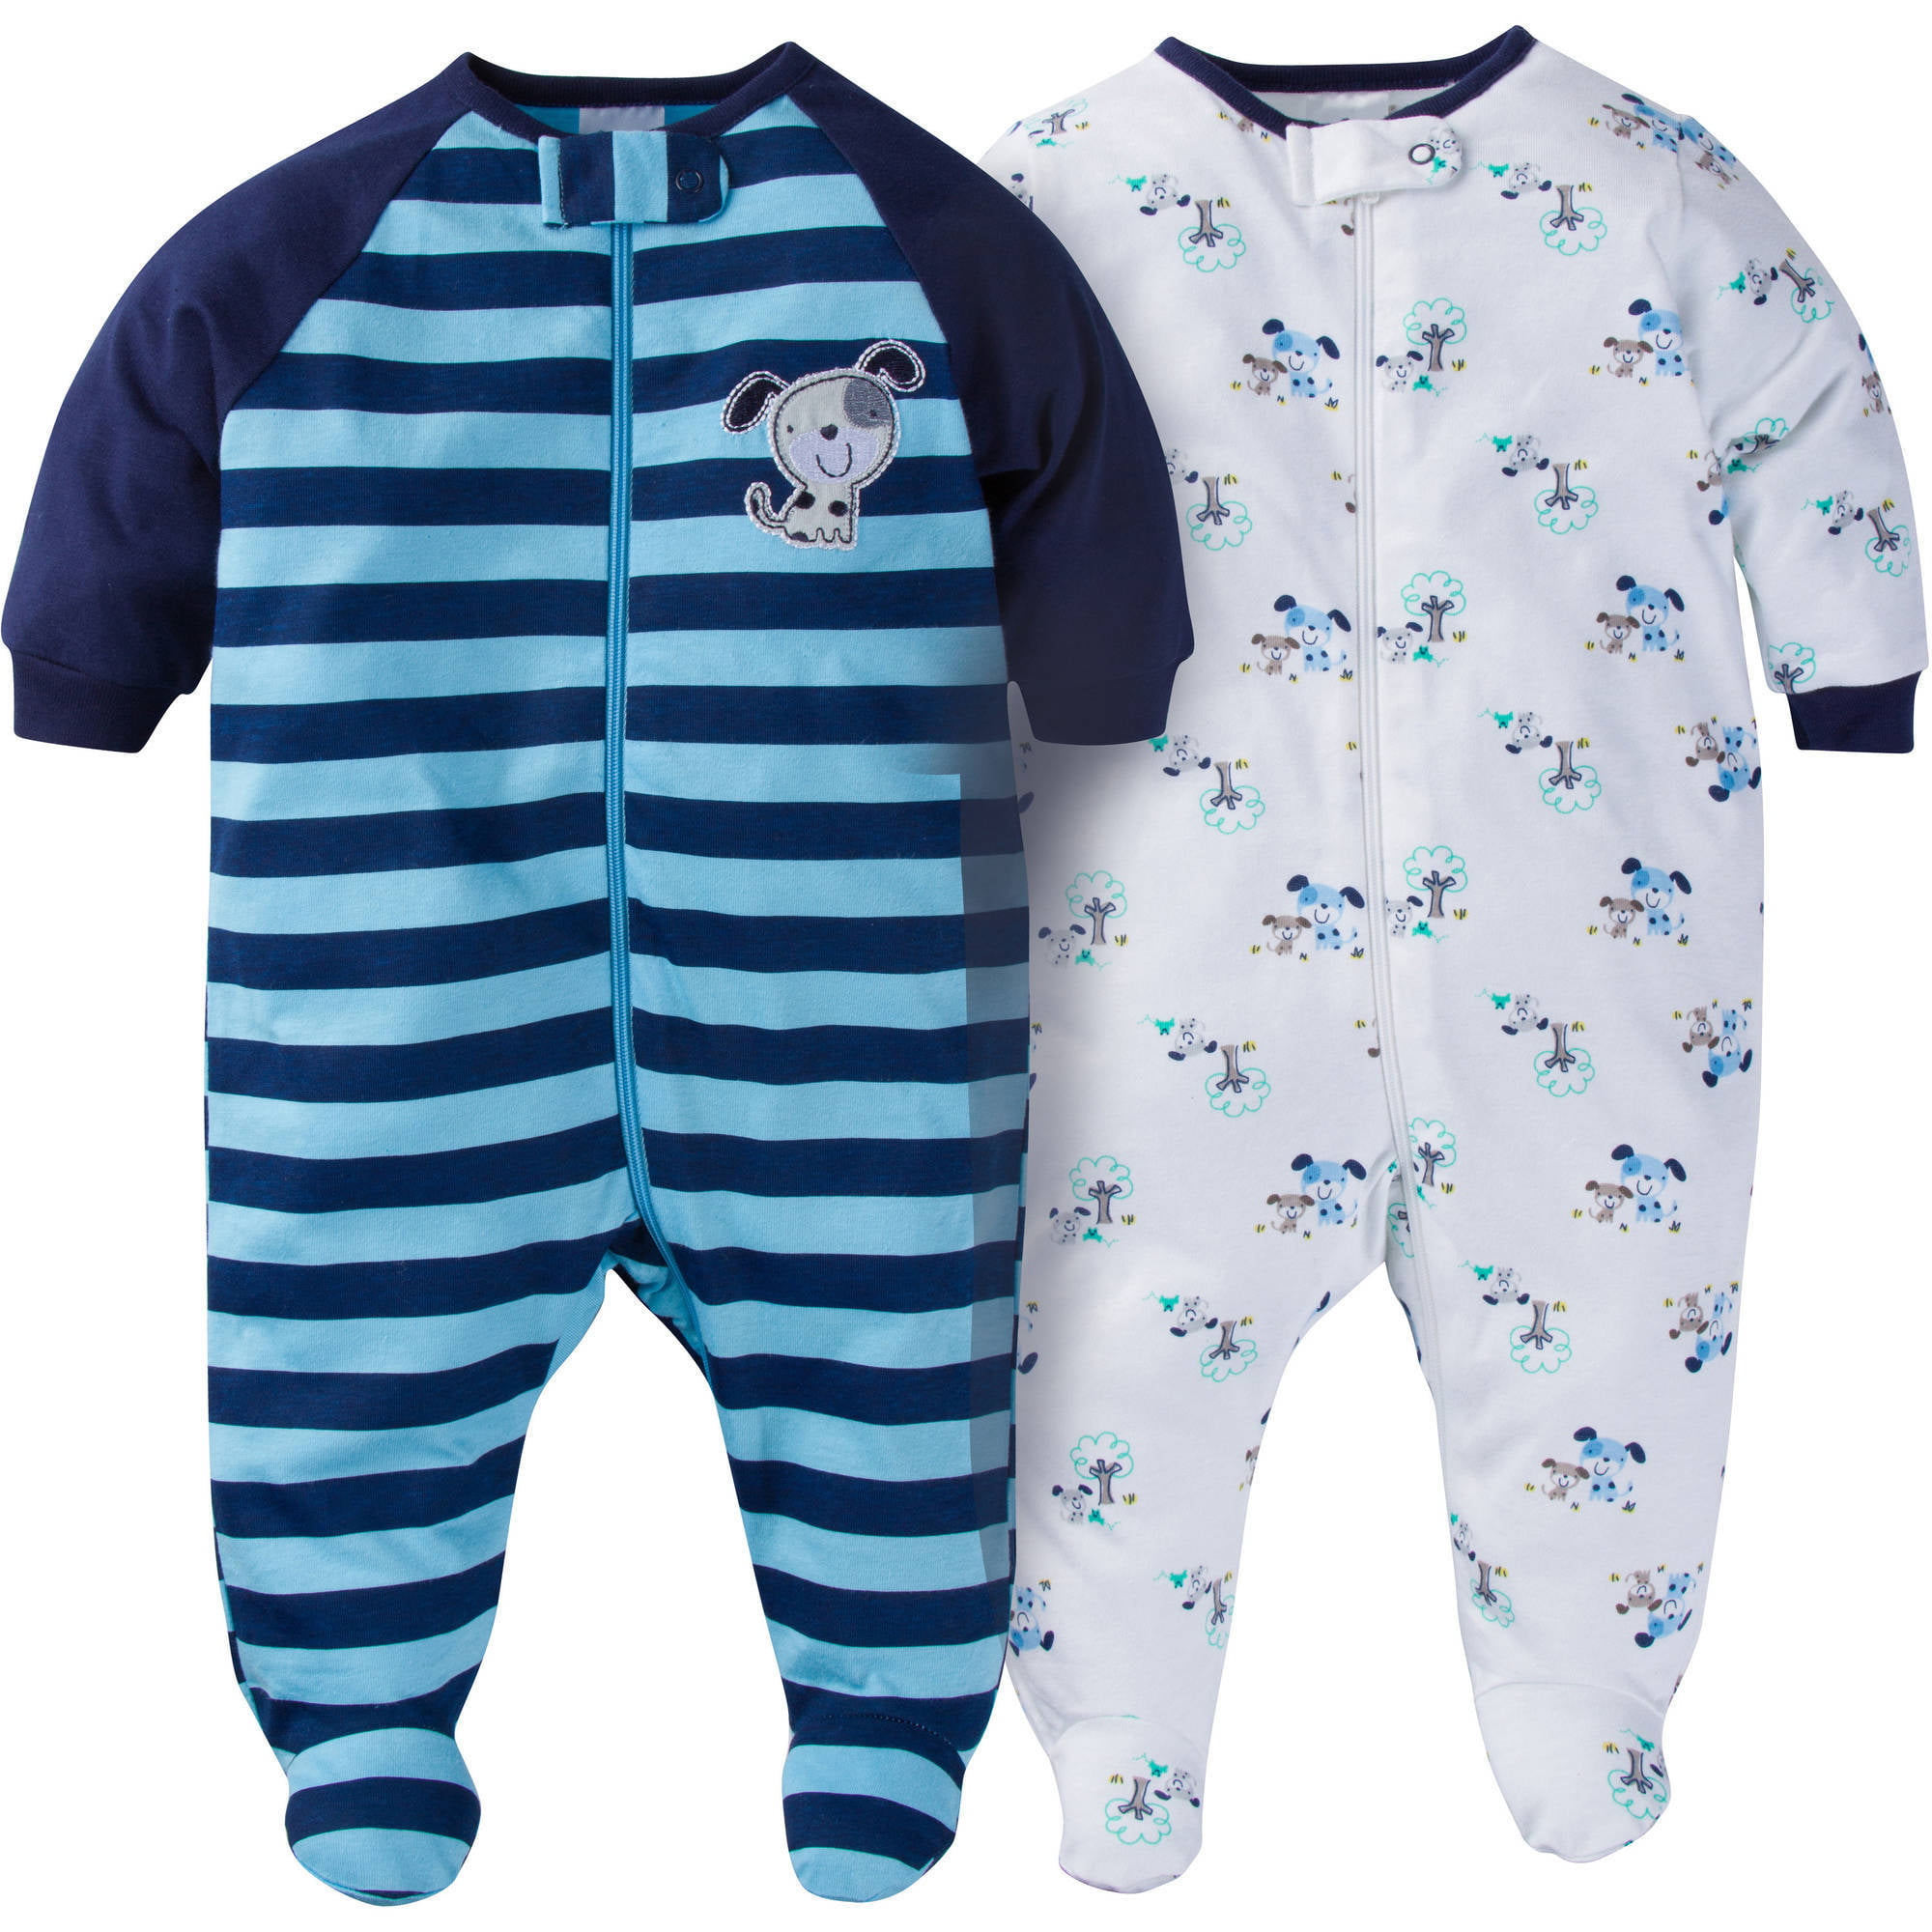 Essentials Unisex-Baby Baby Zip-Front Footed Sleep and Play Sleepers